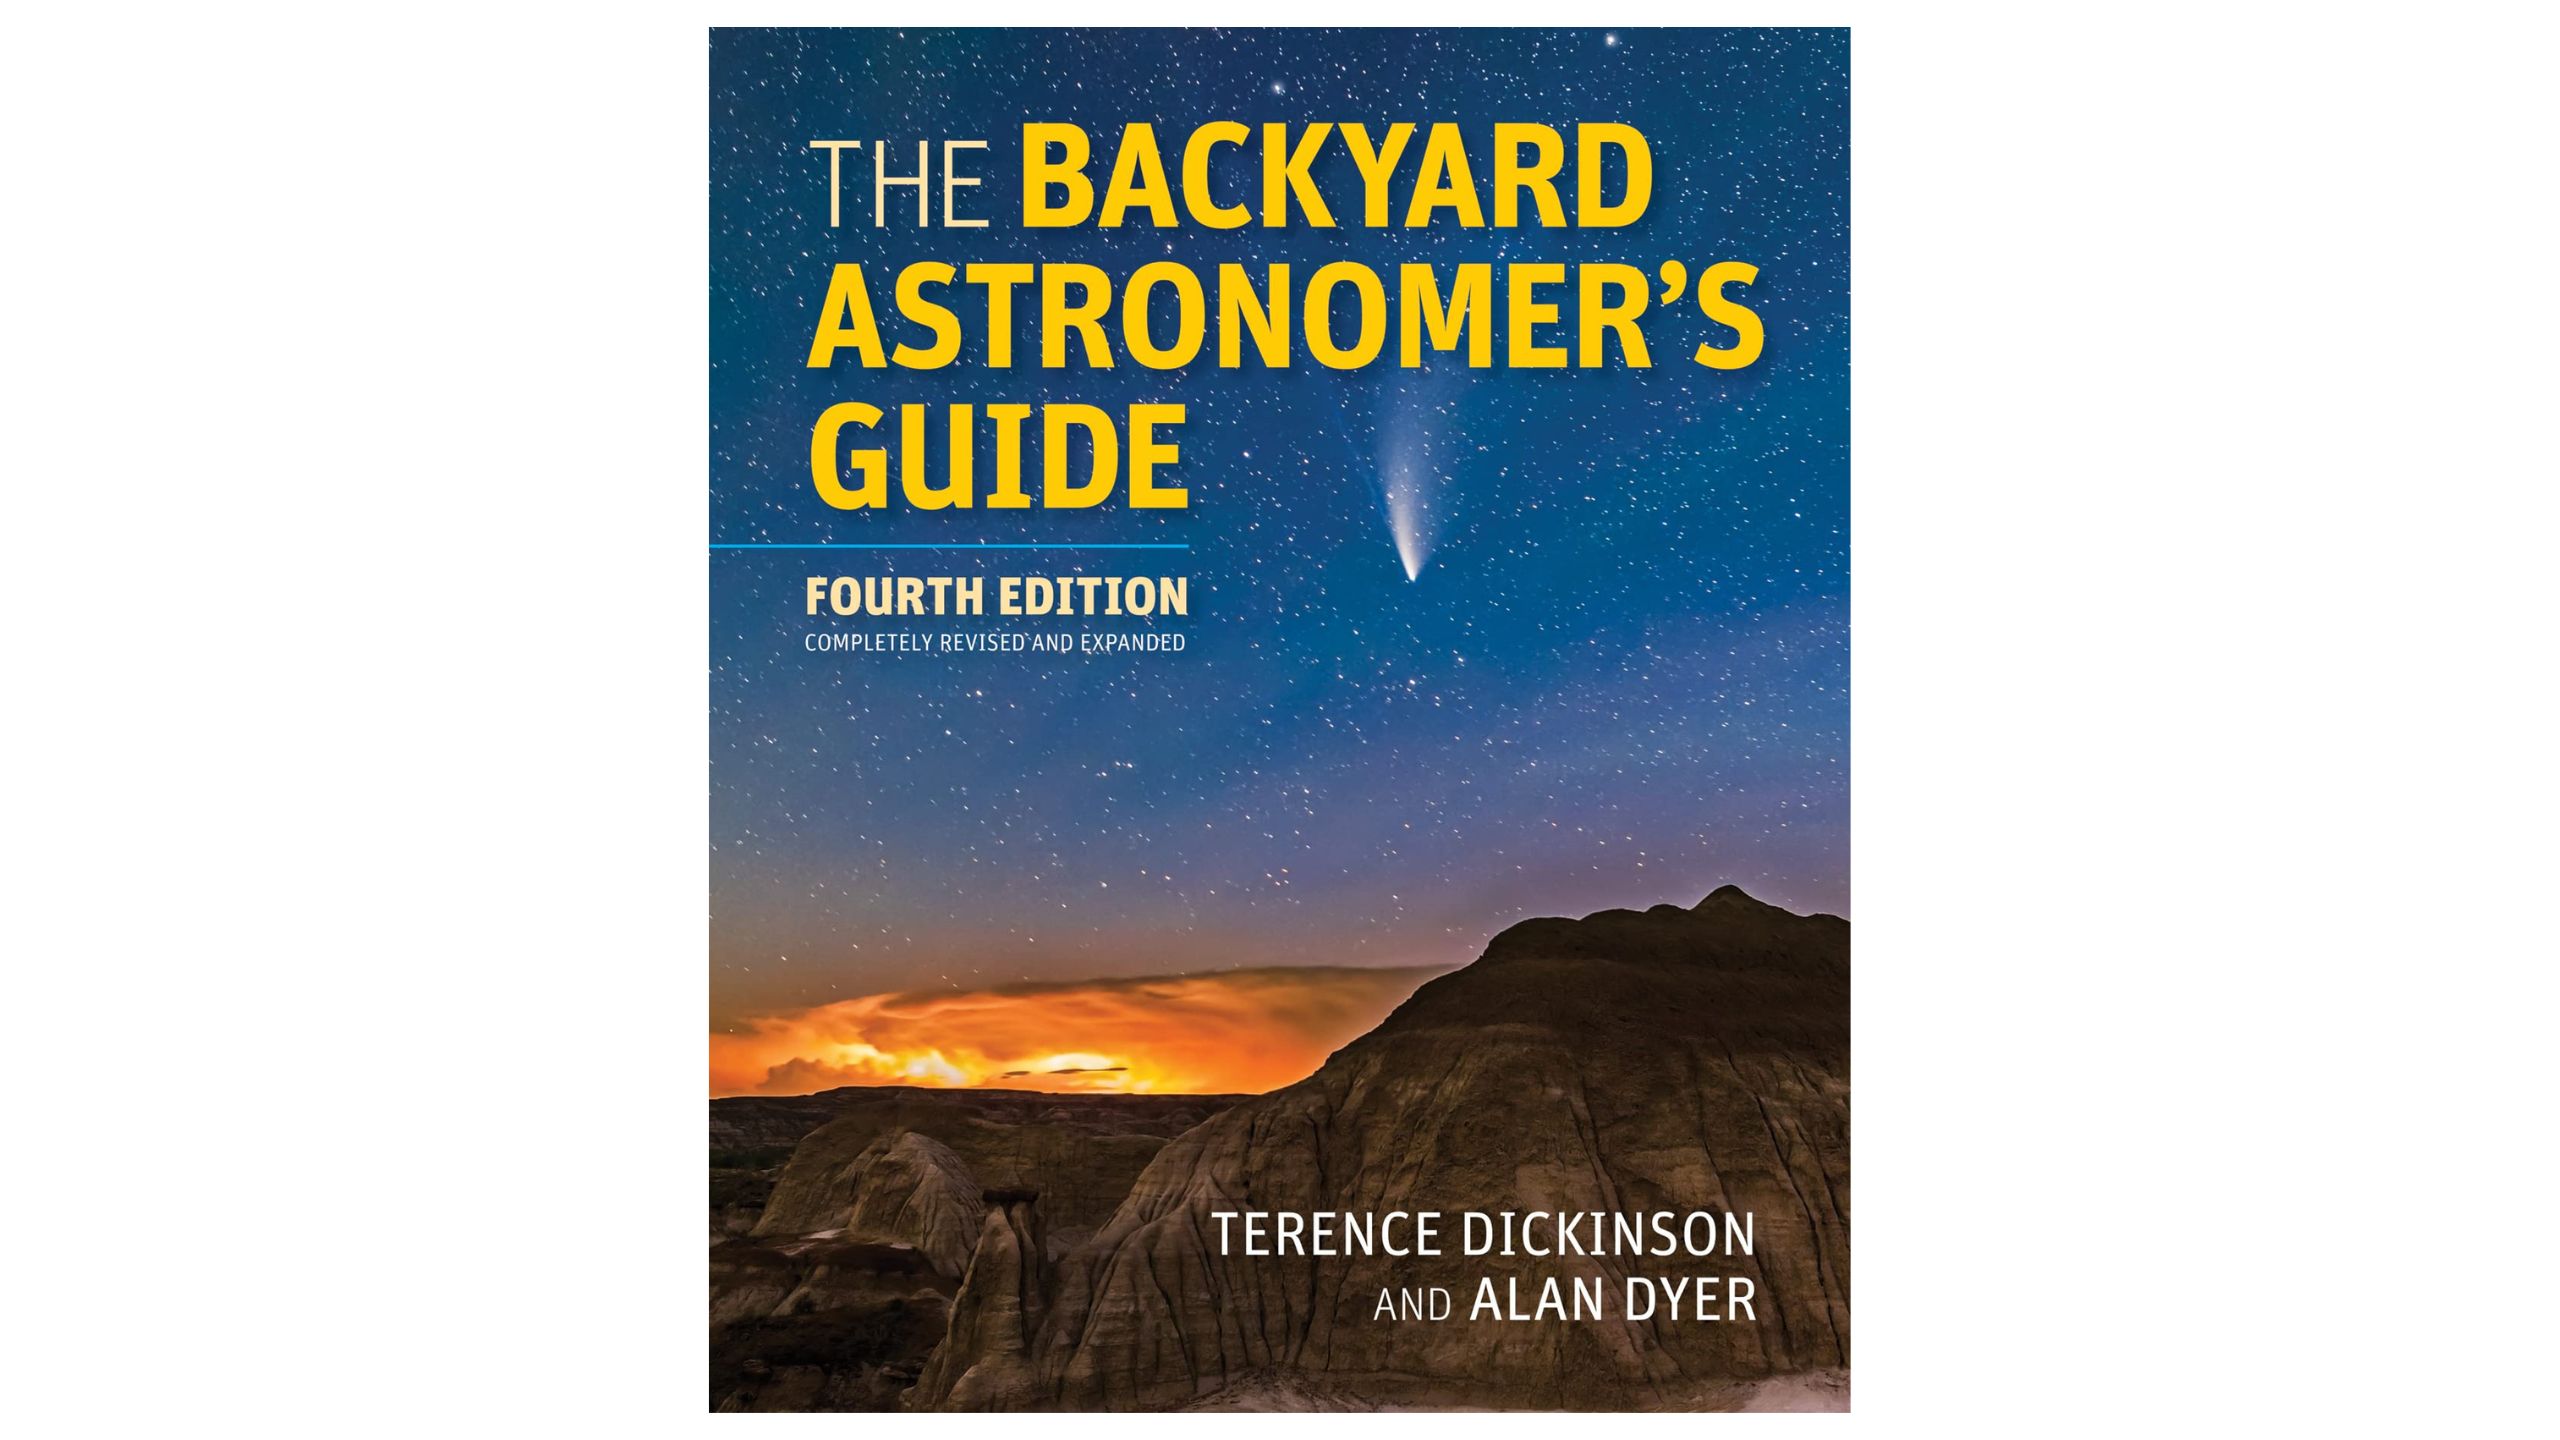 Backyard astronomers guide book on white background